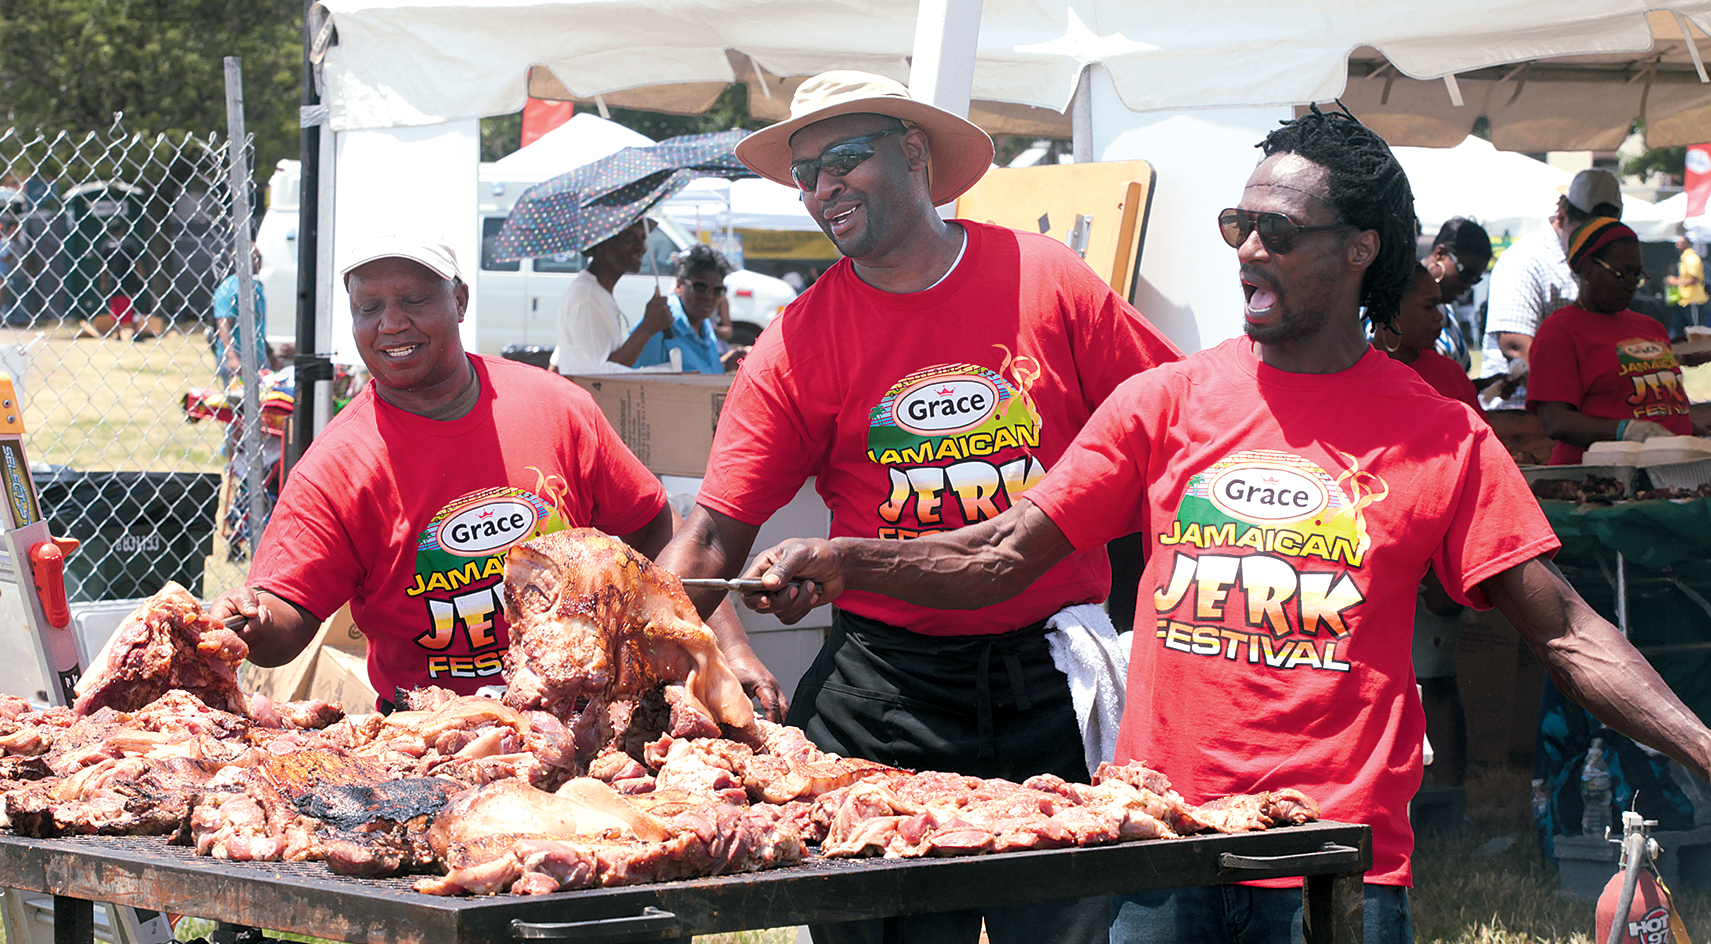 3 Things To Know Before You Go To The Grace Jamaican Jerk